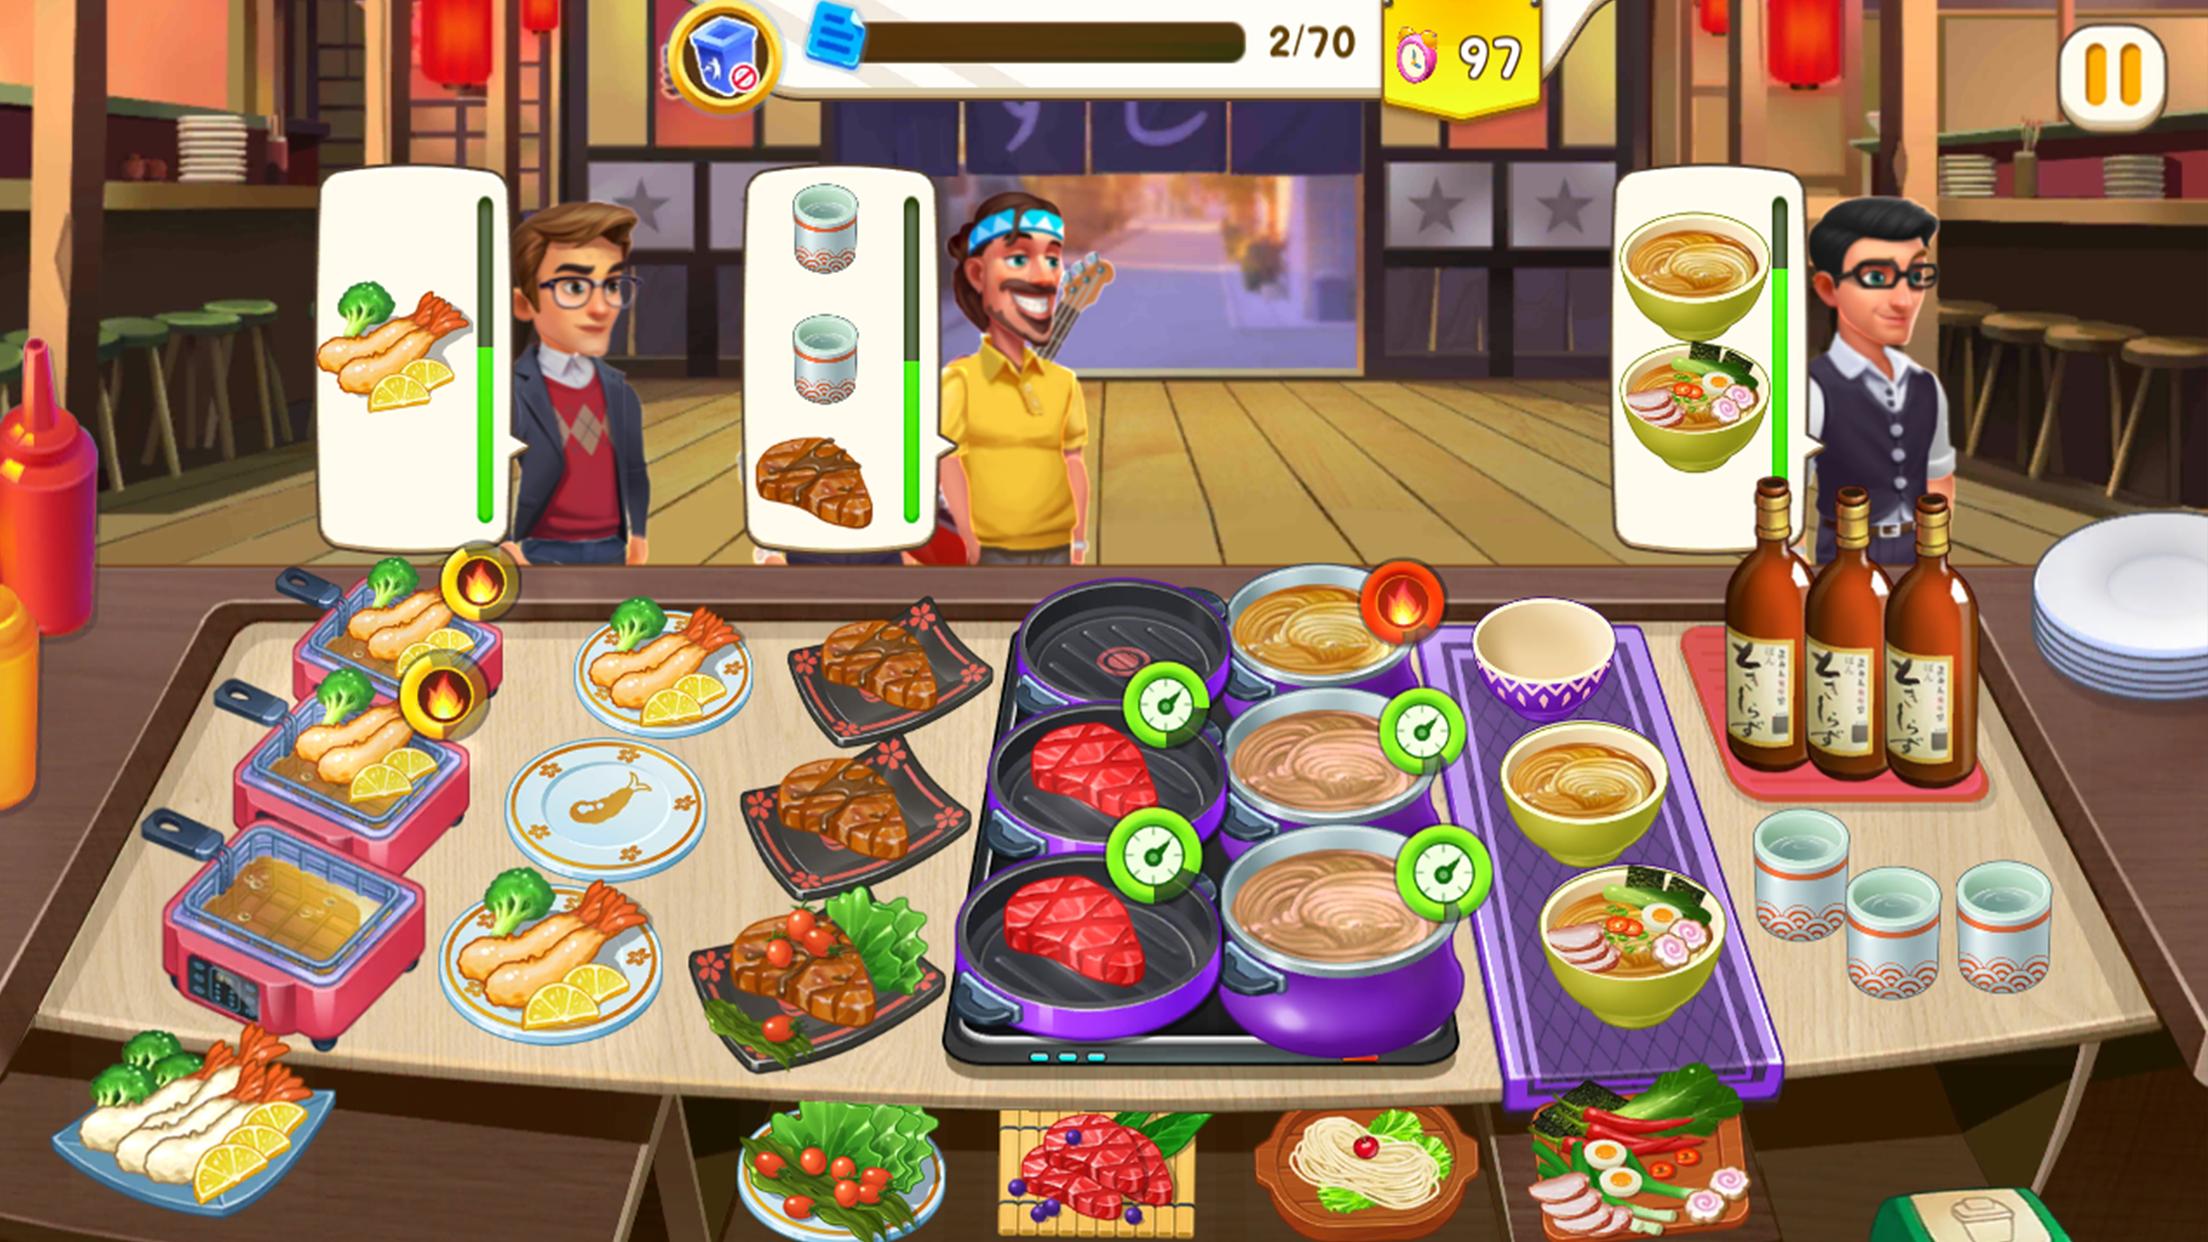 Cooking Rush Bake it to delicious 2.1.2 Screenshot 8